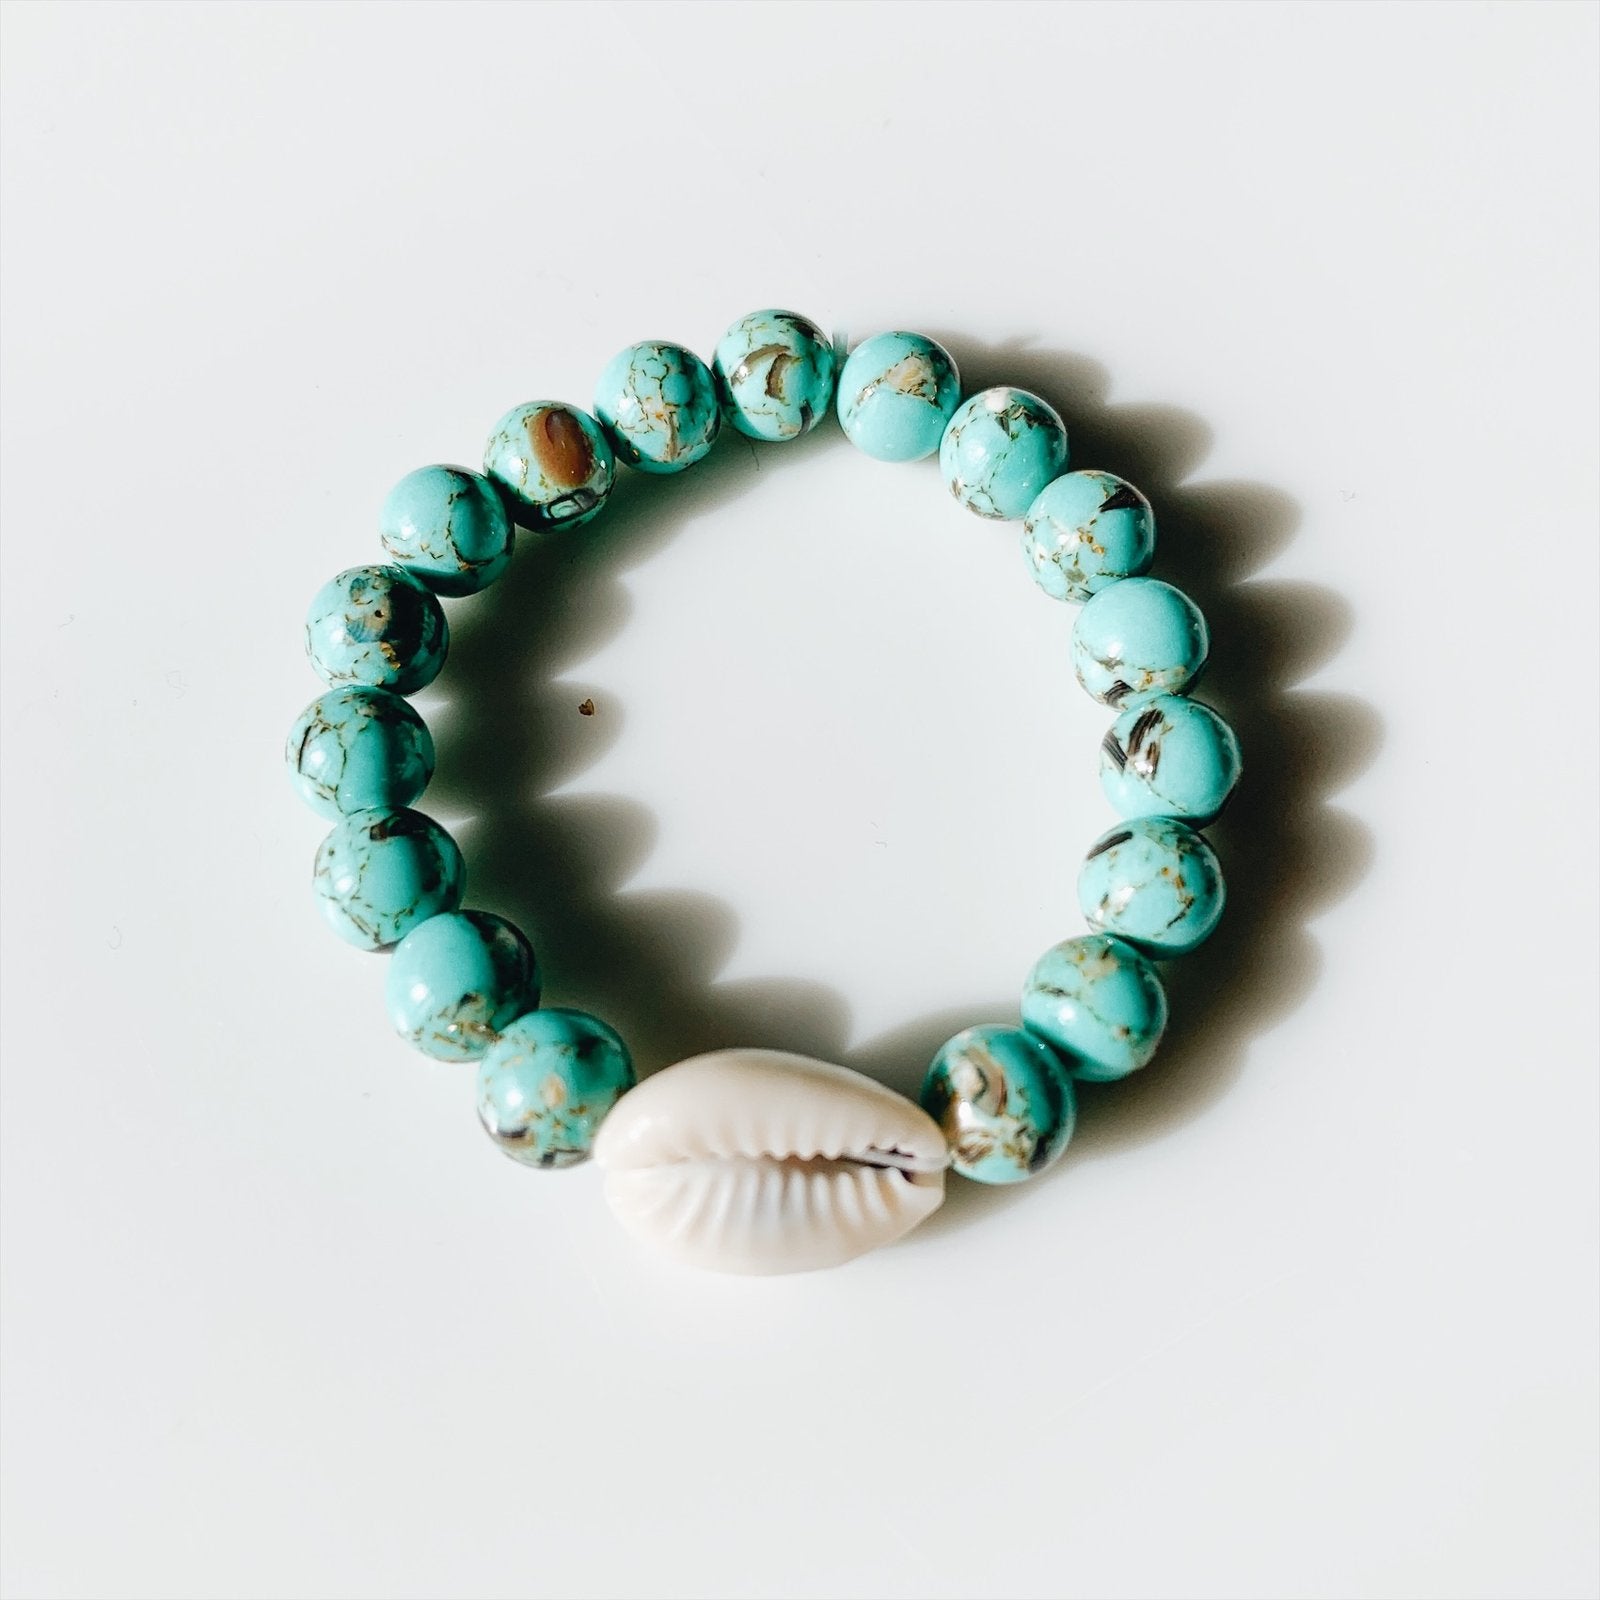 Beaded Bracelet with Natural Shell